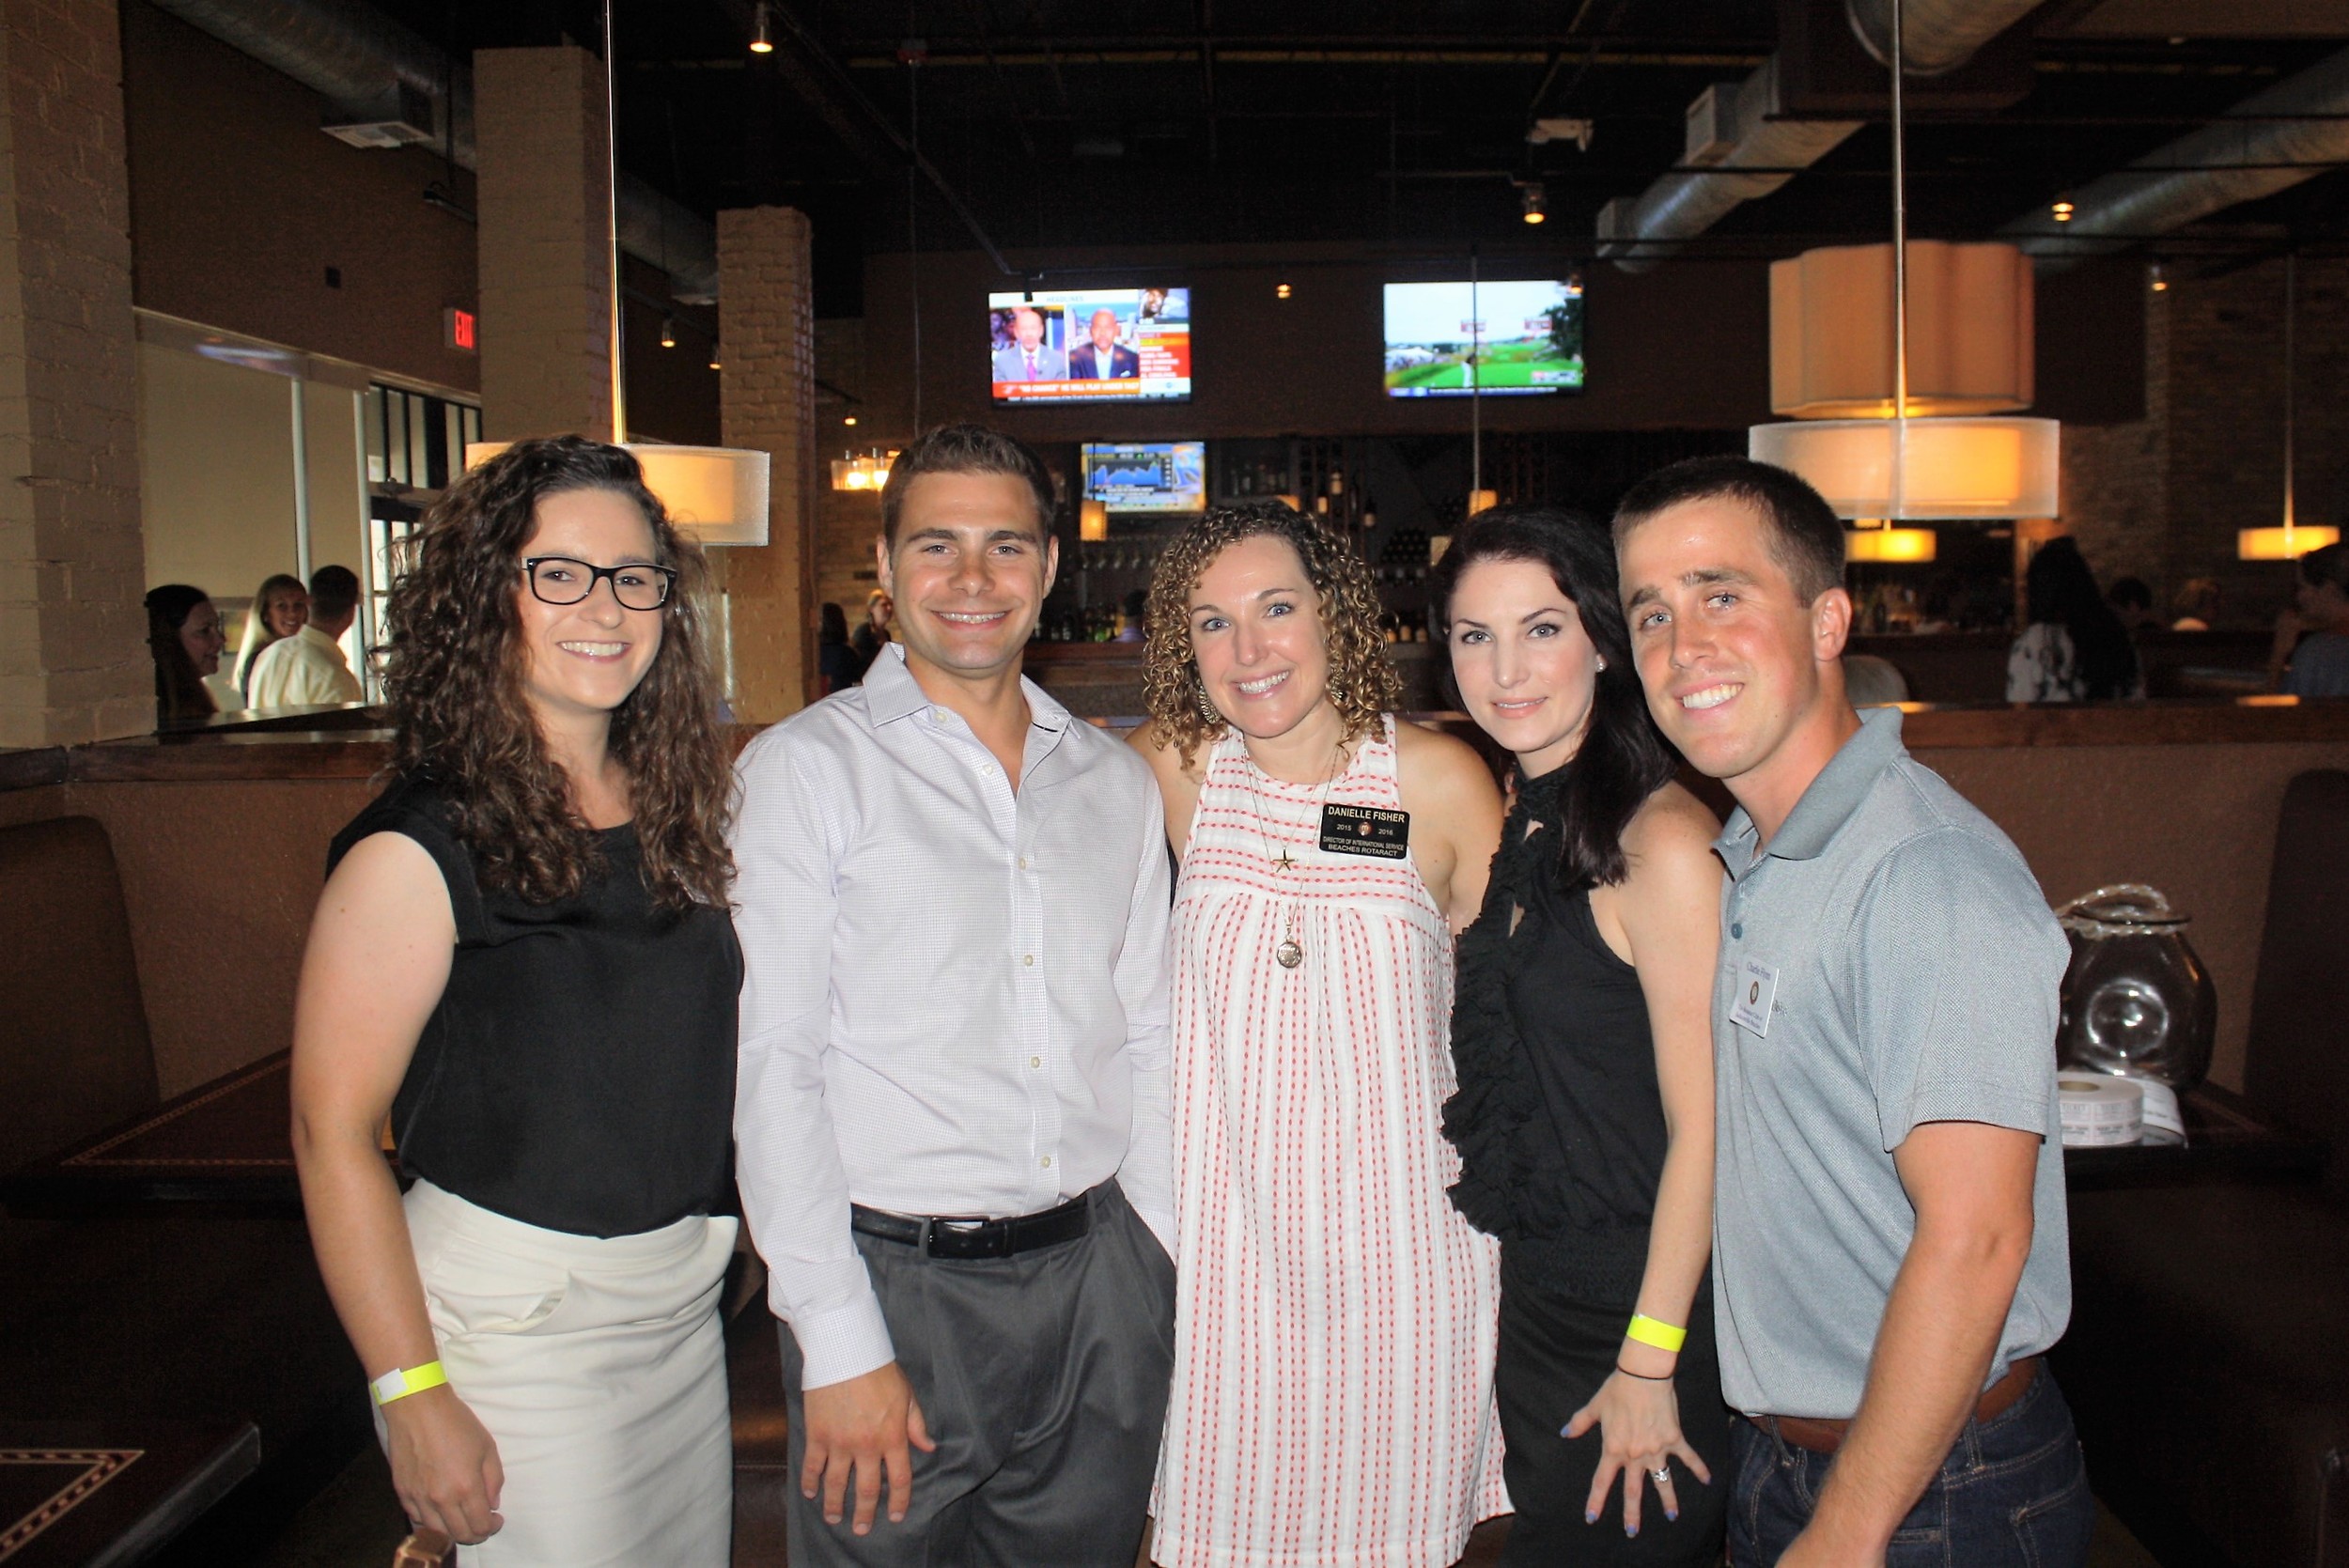 Beaches Rotaract wine tasting committee members included Magda Cichon, Anthony Sifakis, Danielle Fisher, Rachael Daven and Charlie Flynn.